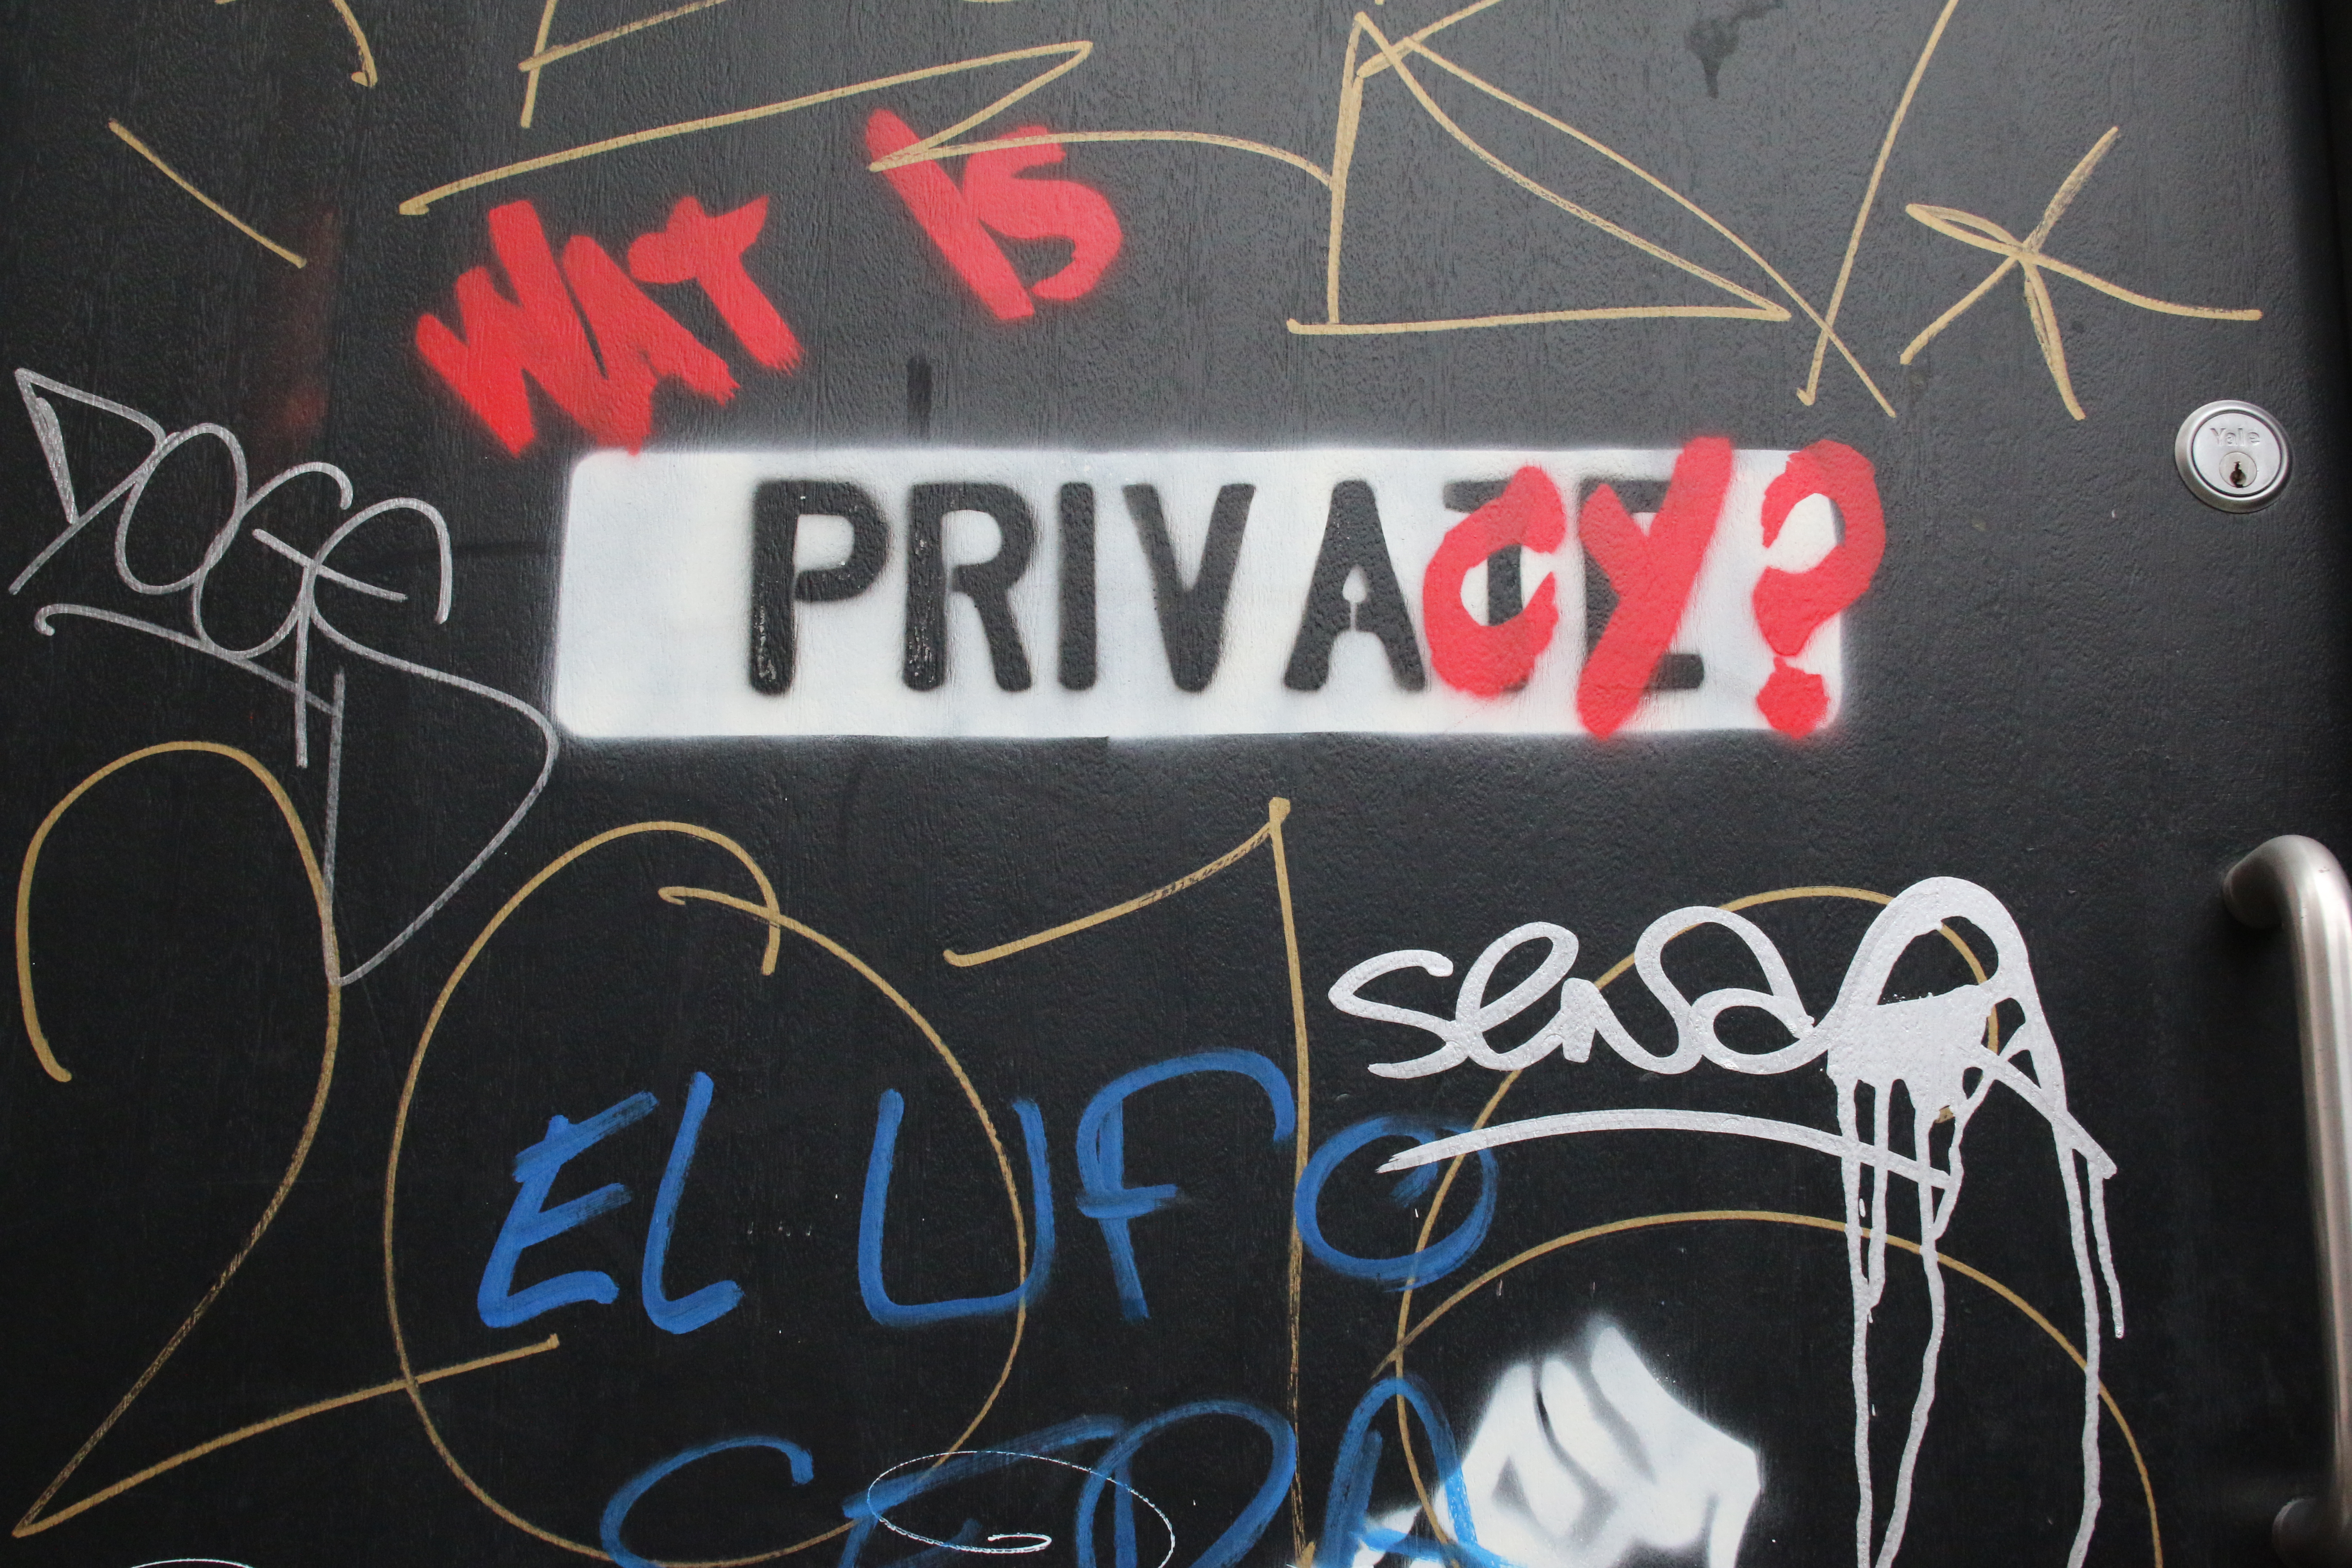 Graffiti on a wall, wandering what is privacy?